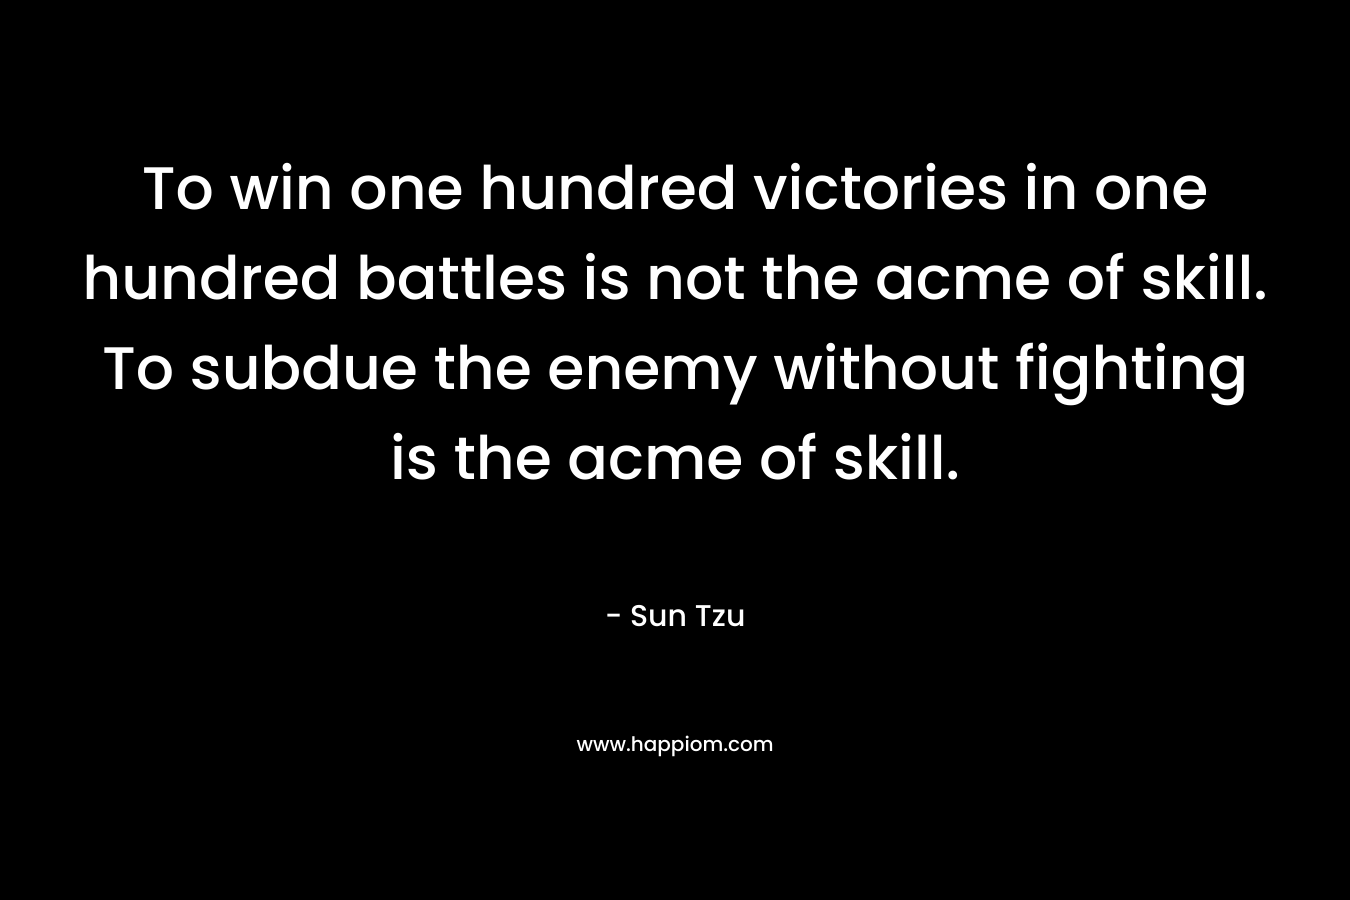 To win one hundred victories in one hundred battles is not the acme of skill. To subdue the enemy without fighting is the acme of skill. – Sun Tzu